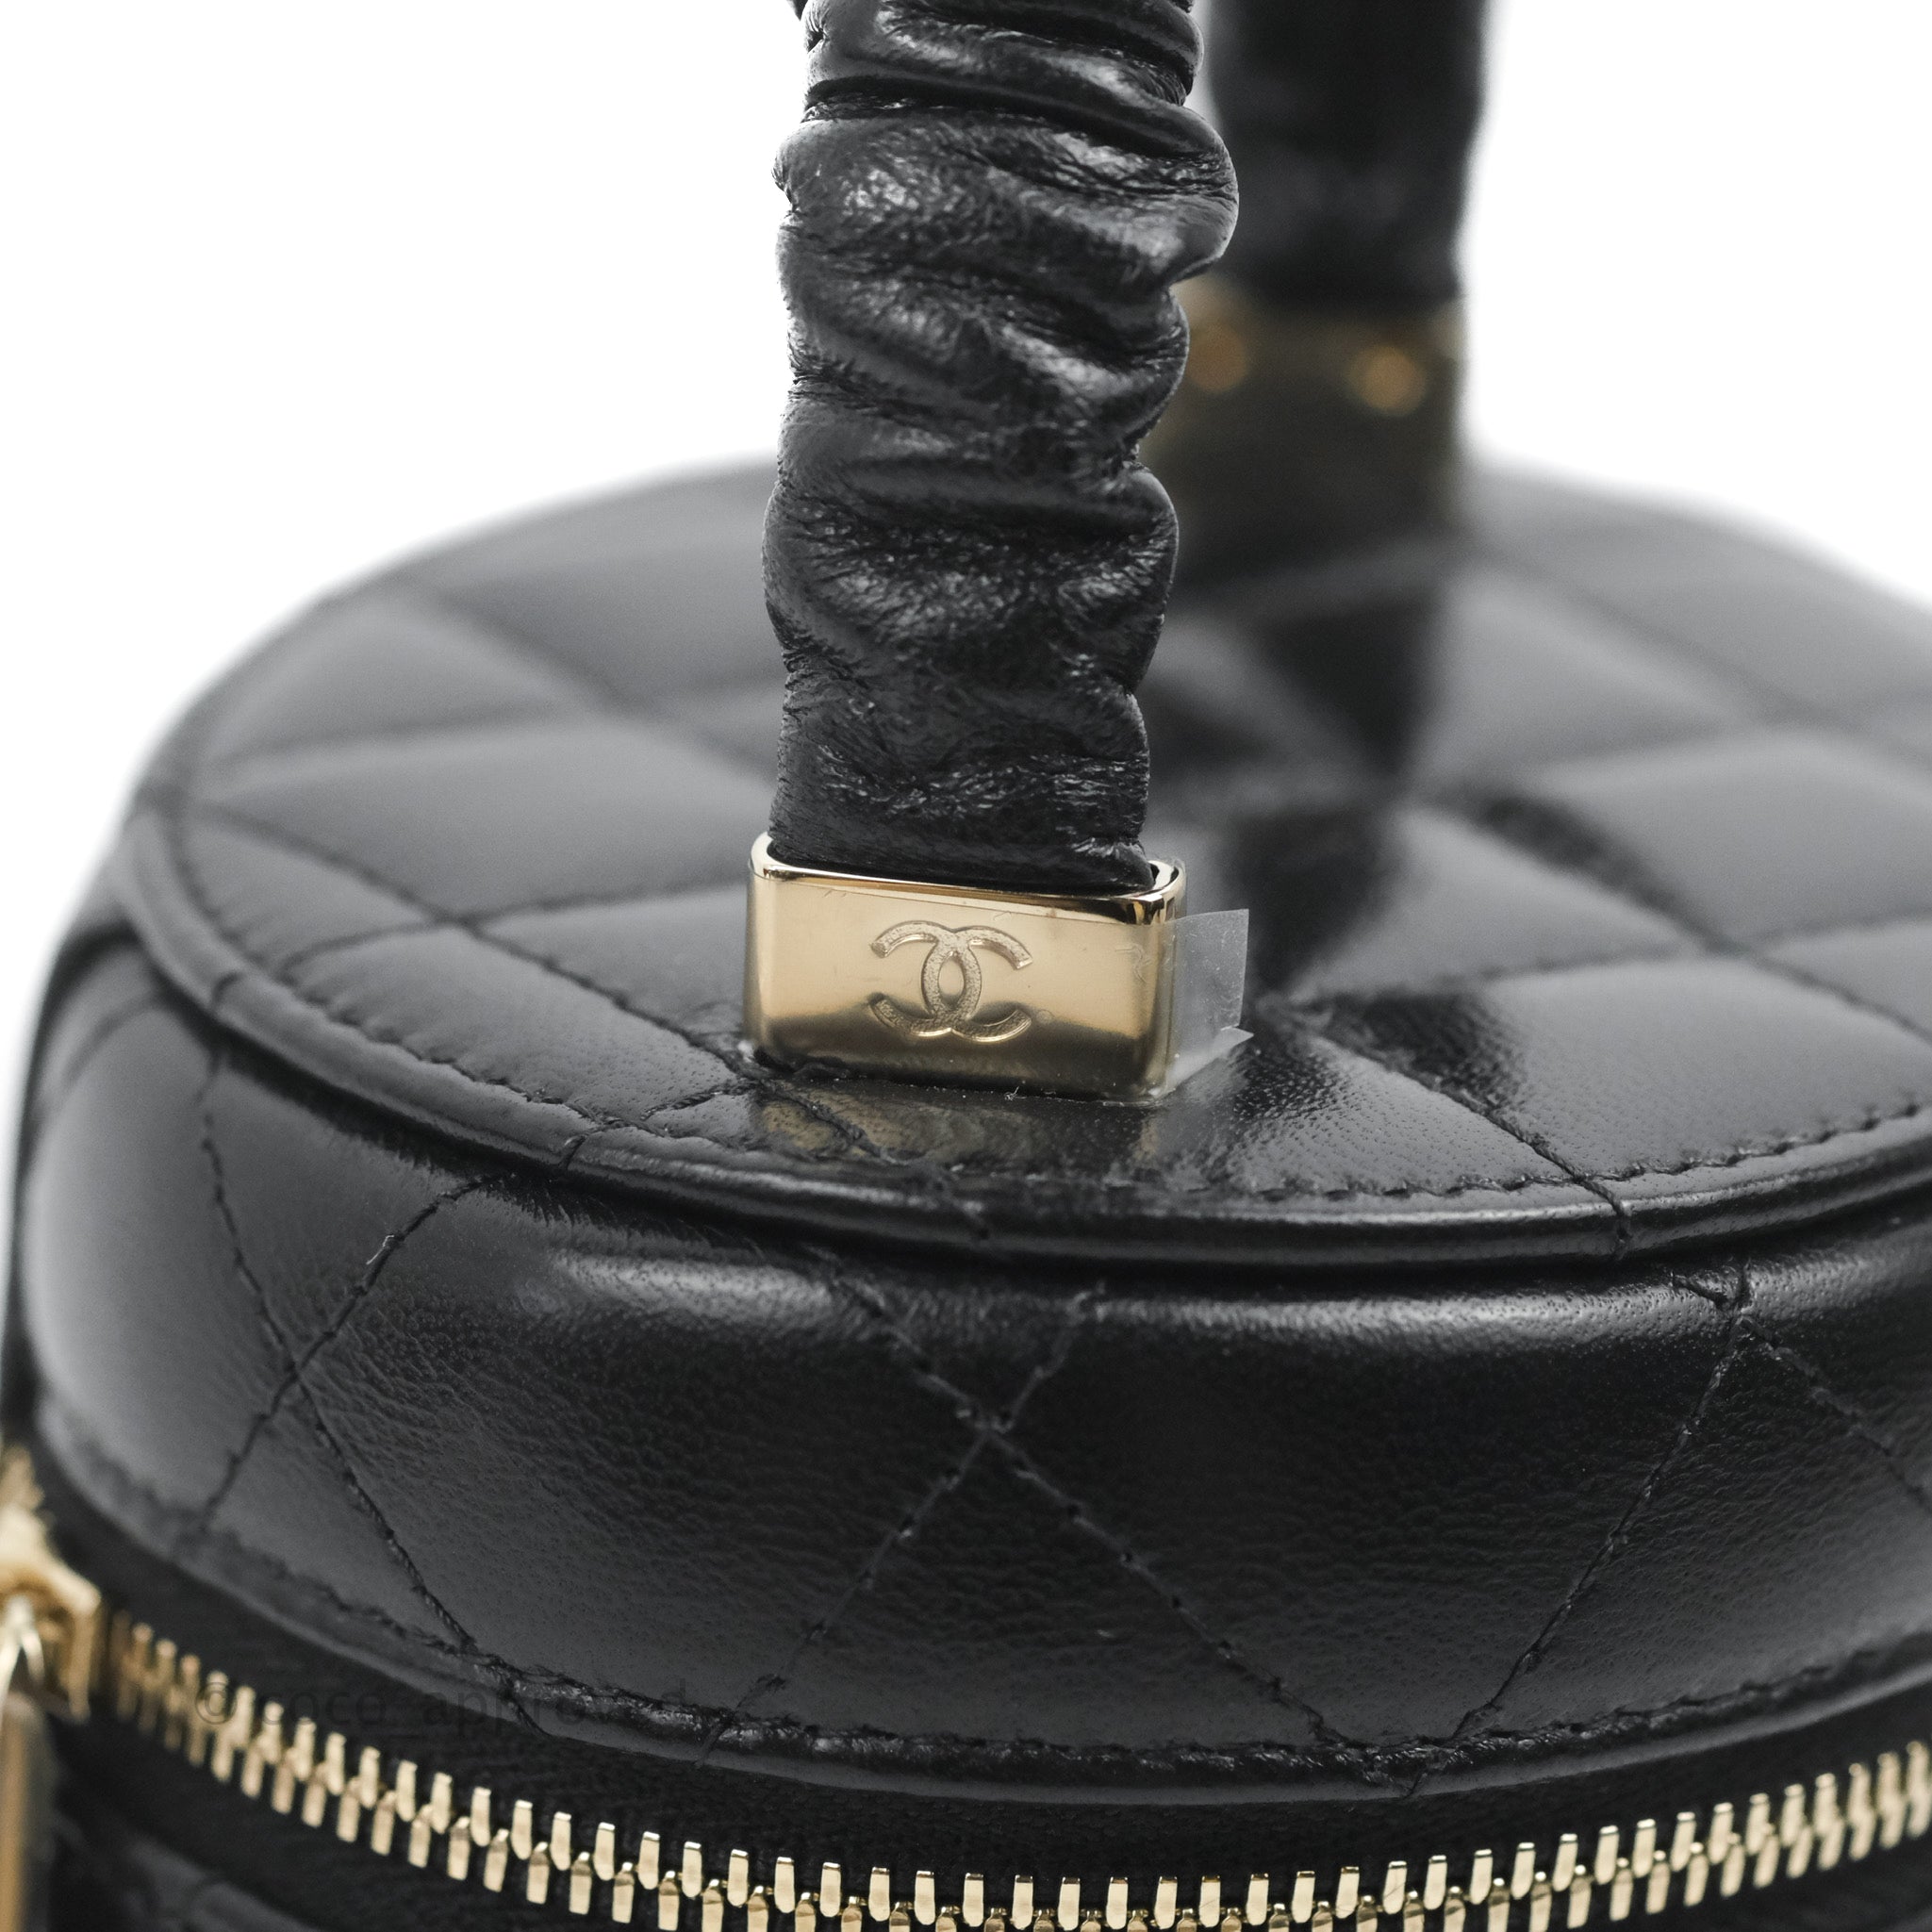 CHANEL, Bags, Chanel Lambskin Quilted Small Top Handle Vanity Case With  Chain Black